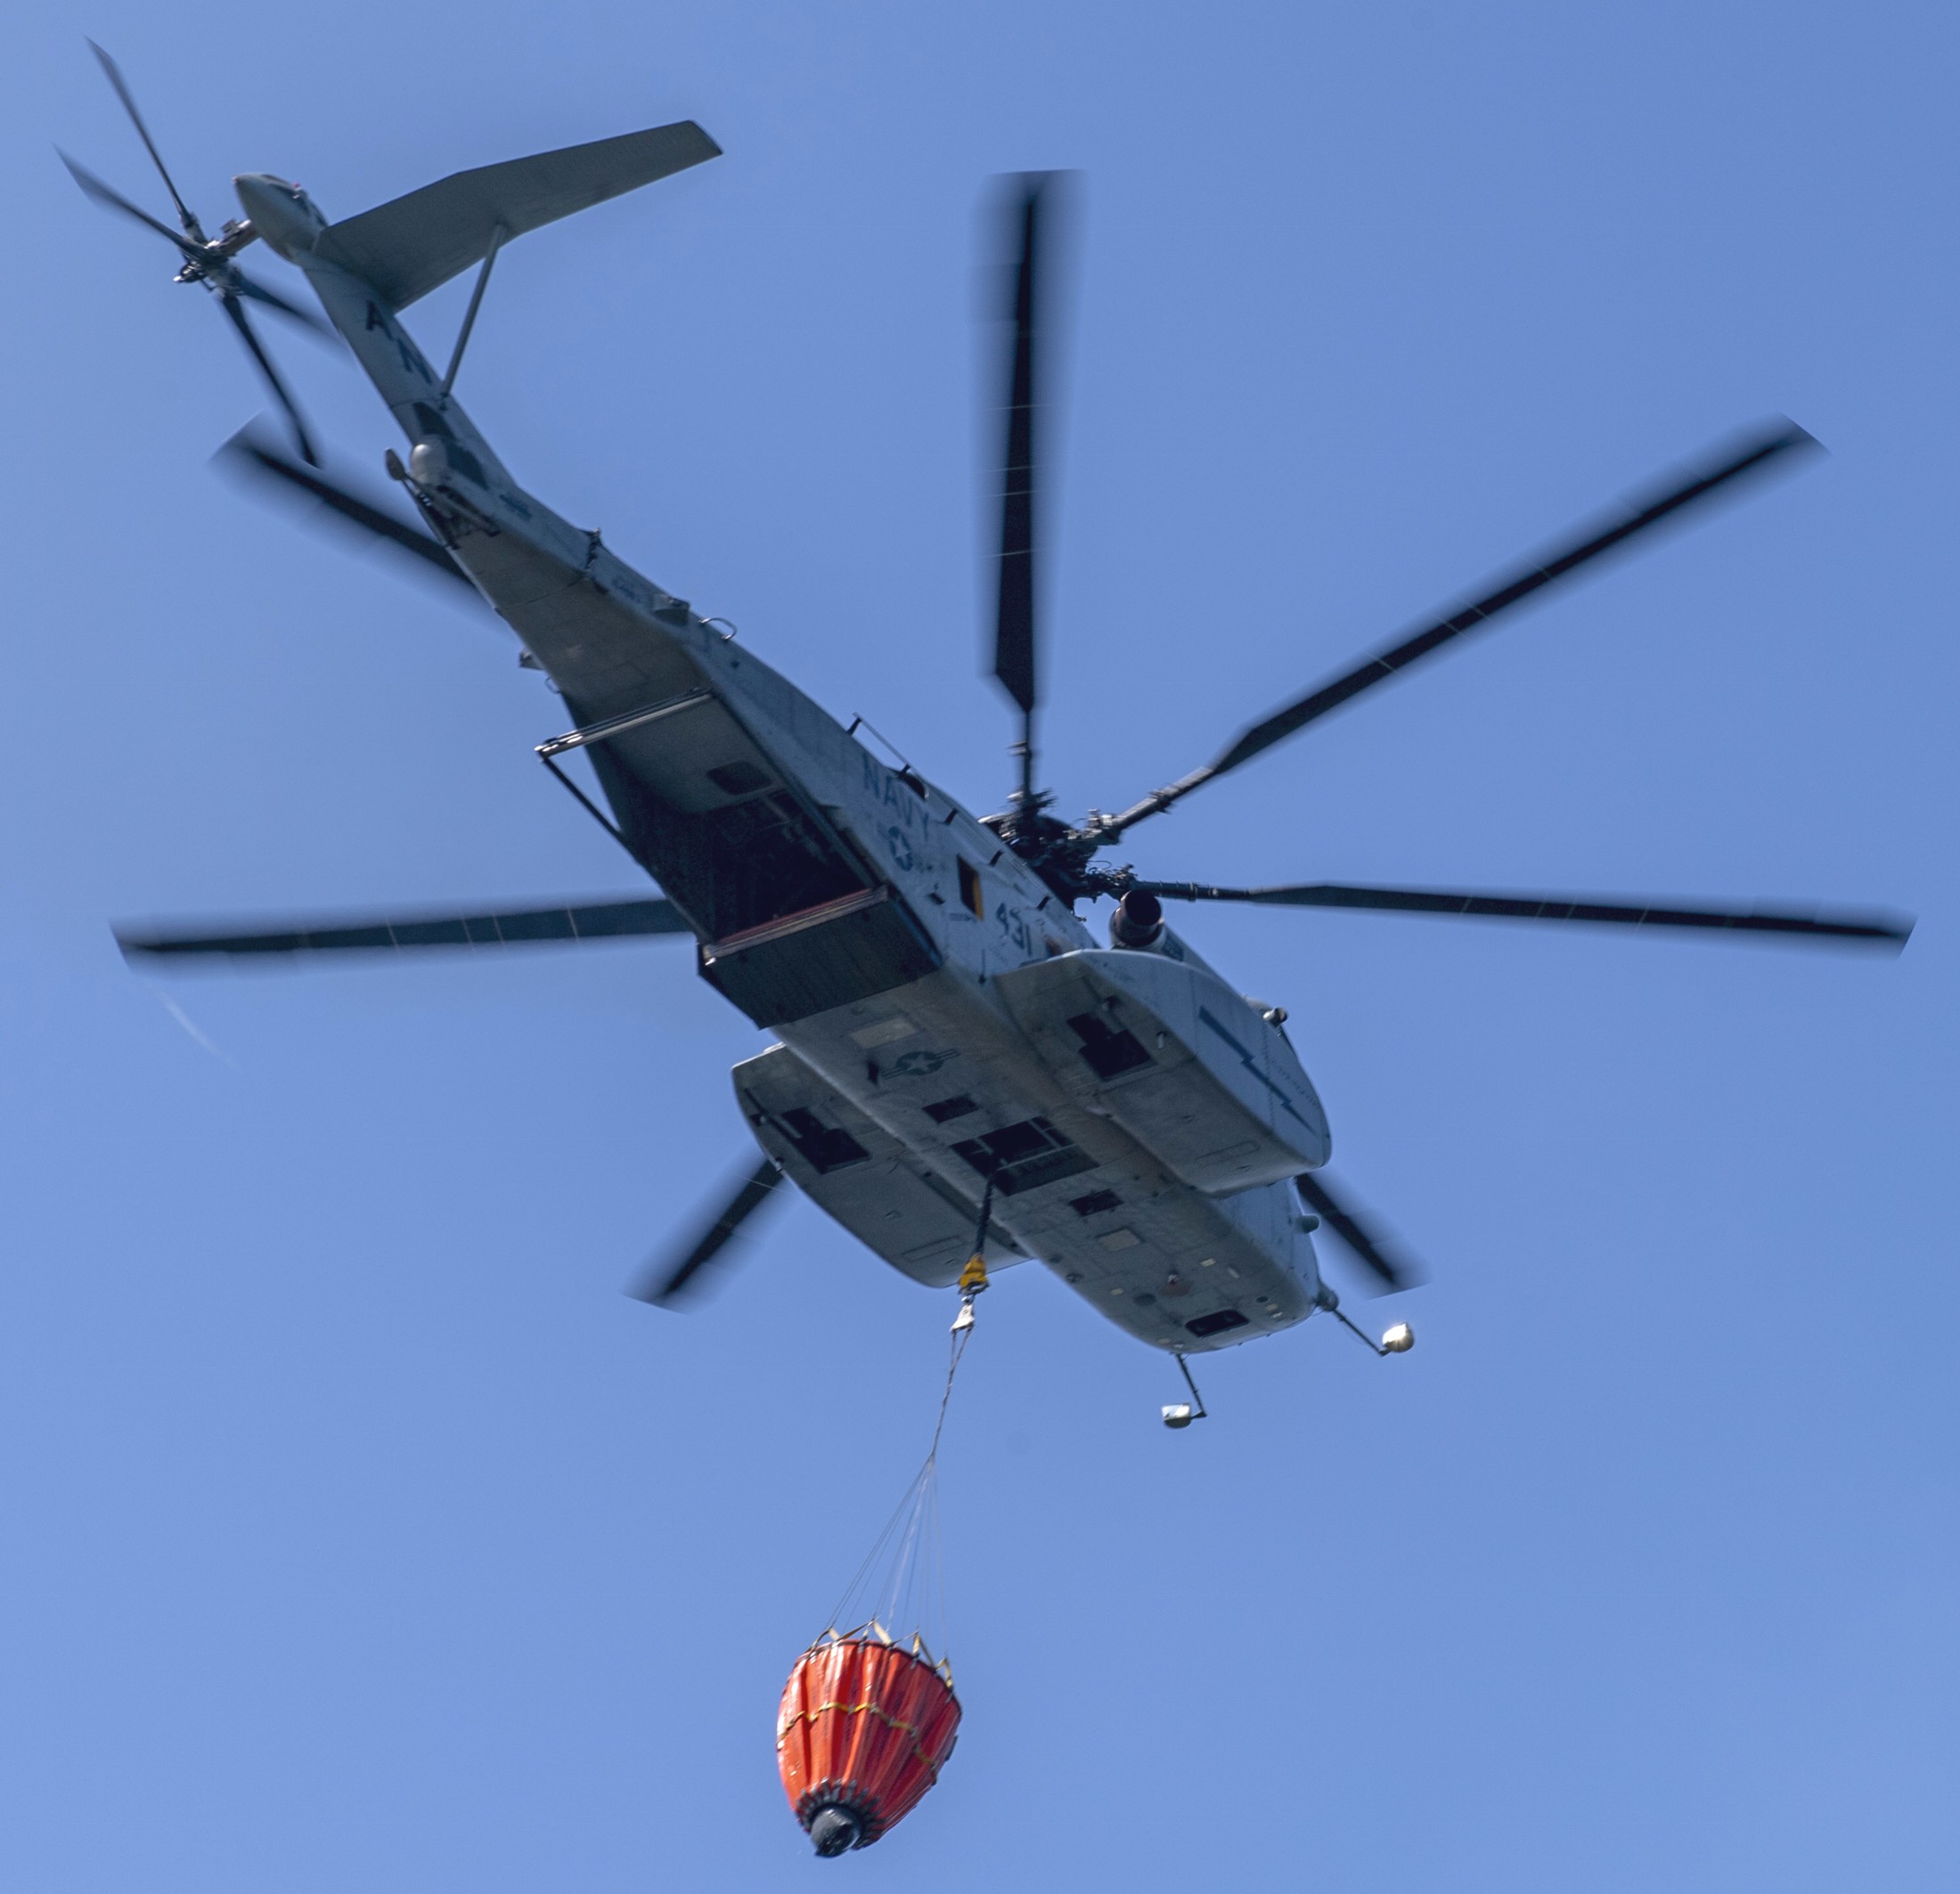 hm-12 sea dragons helicopter mine countermeasures squadron navy mh-53d bambi bucket 30